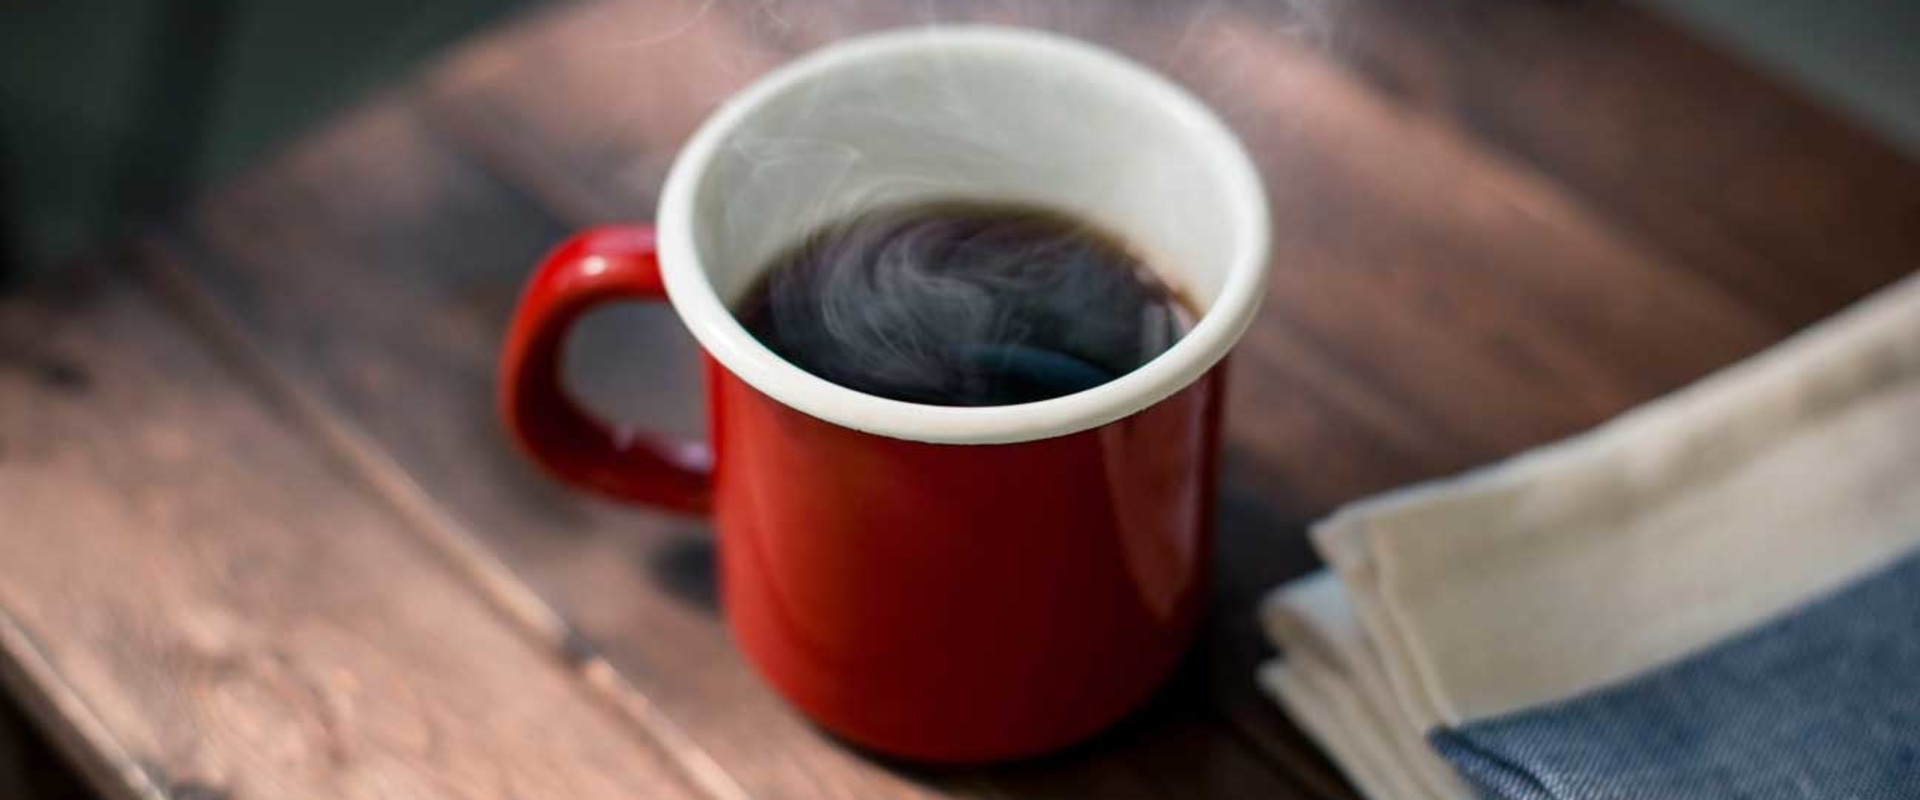 How to Choose the Healthiest Coffee for Your Health